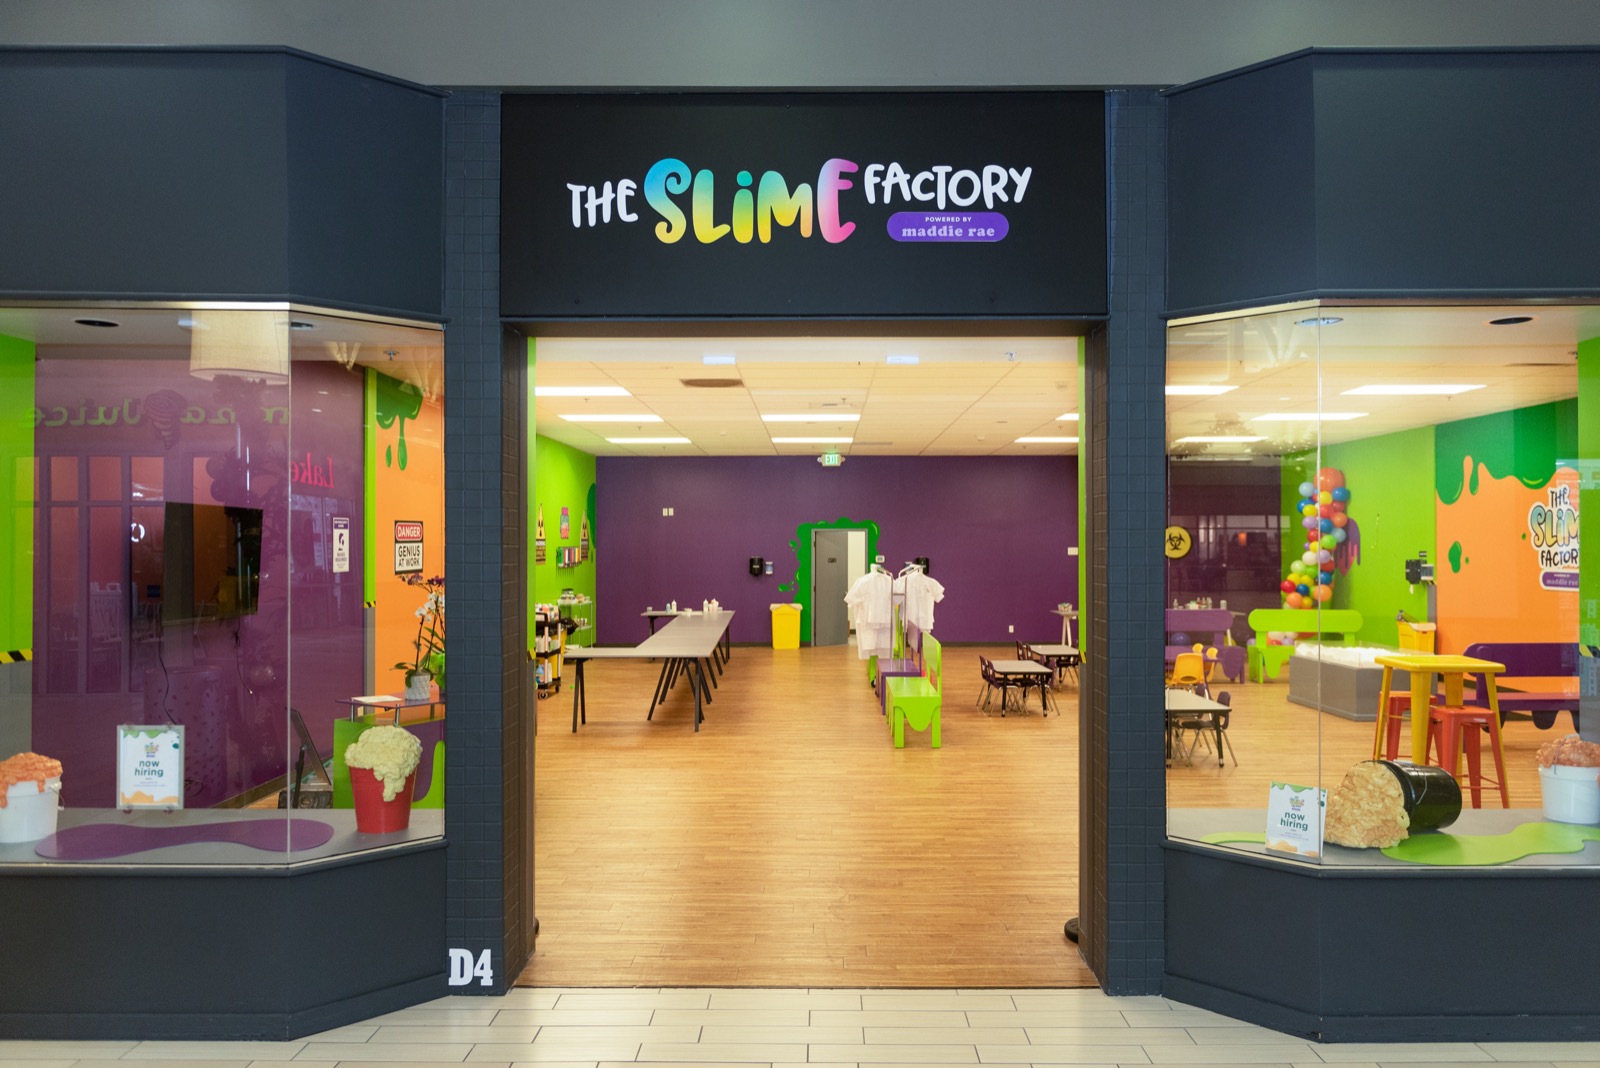 The Slime Factory – We love slime!